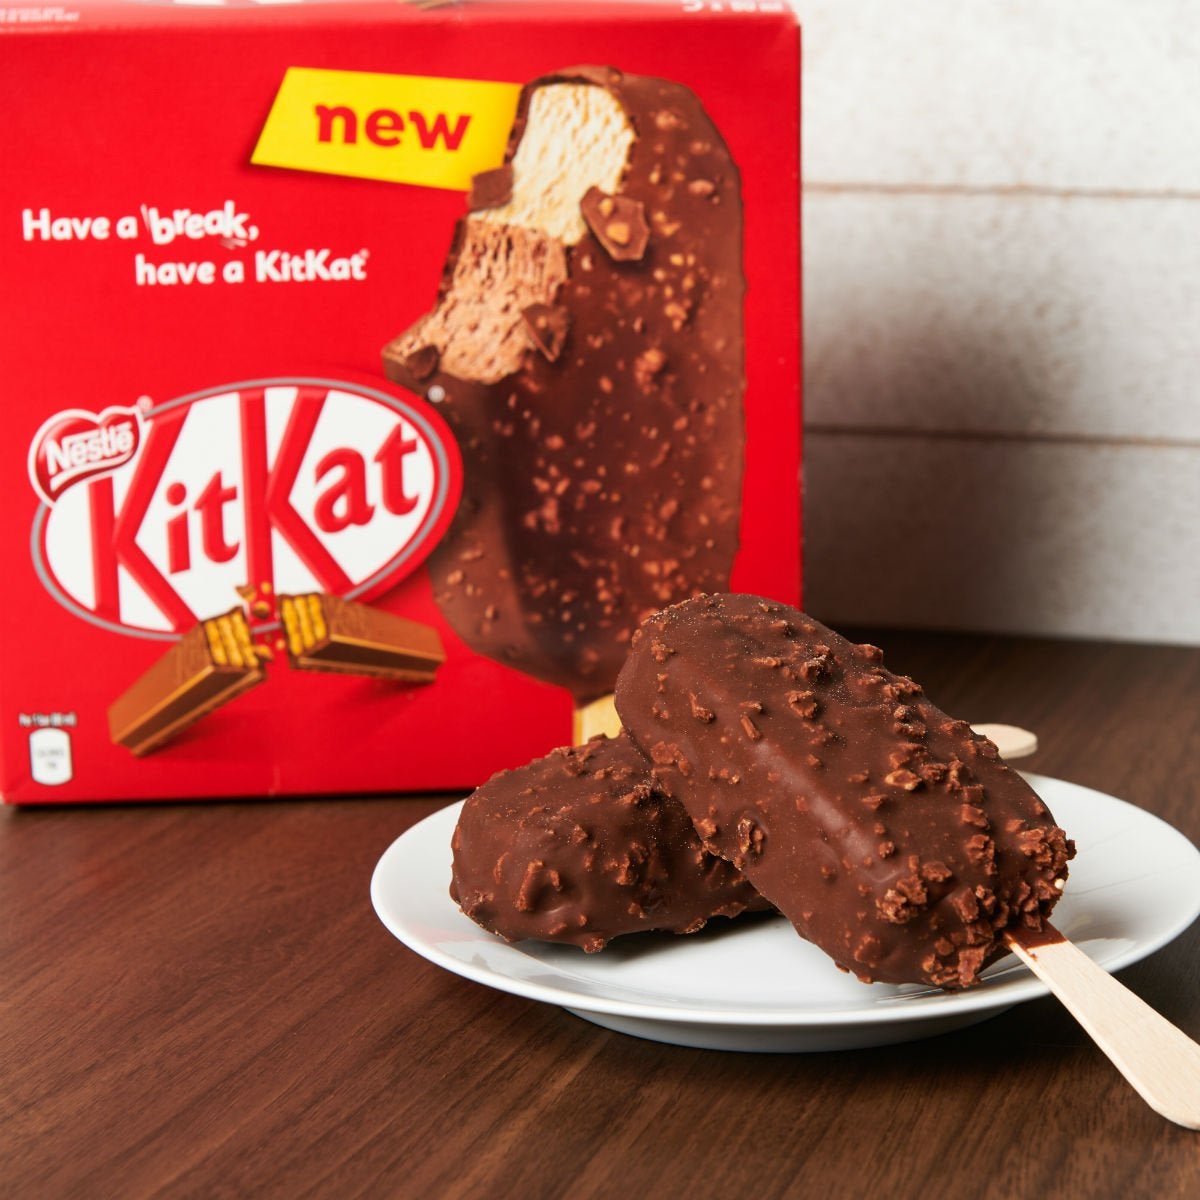 Yummy Kitkat Ice Cream Sticks Are Now Available In Malaysia &Amp; We're Drooling! - World Of Buzz 3